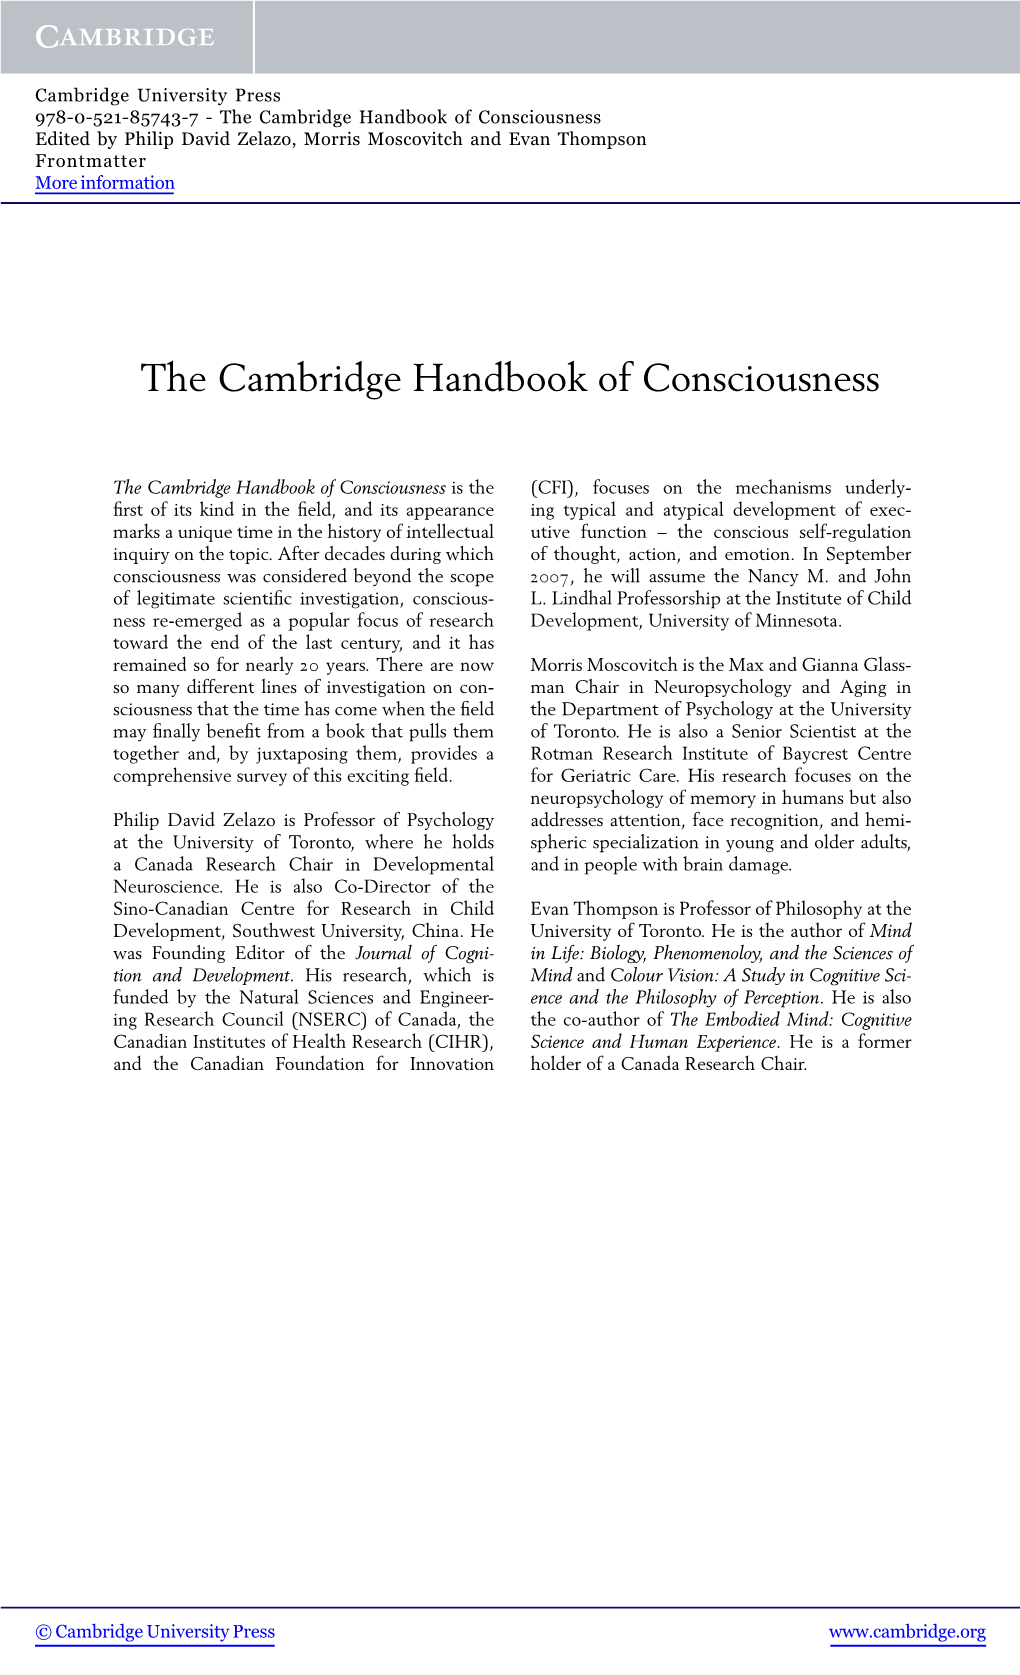 The Cambridge Handbook of Consciousness Edited by Philip David Zelazo, Morris Moscovitch and Evan Thompson Frontmatter More Information